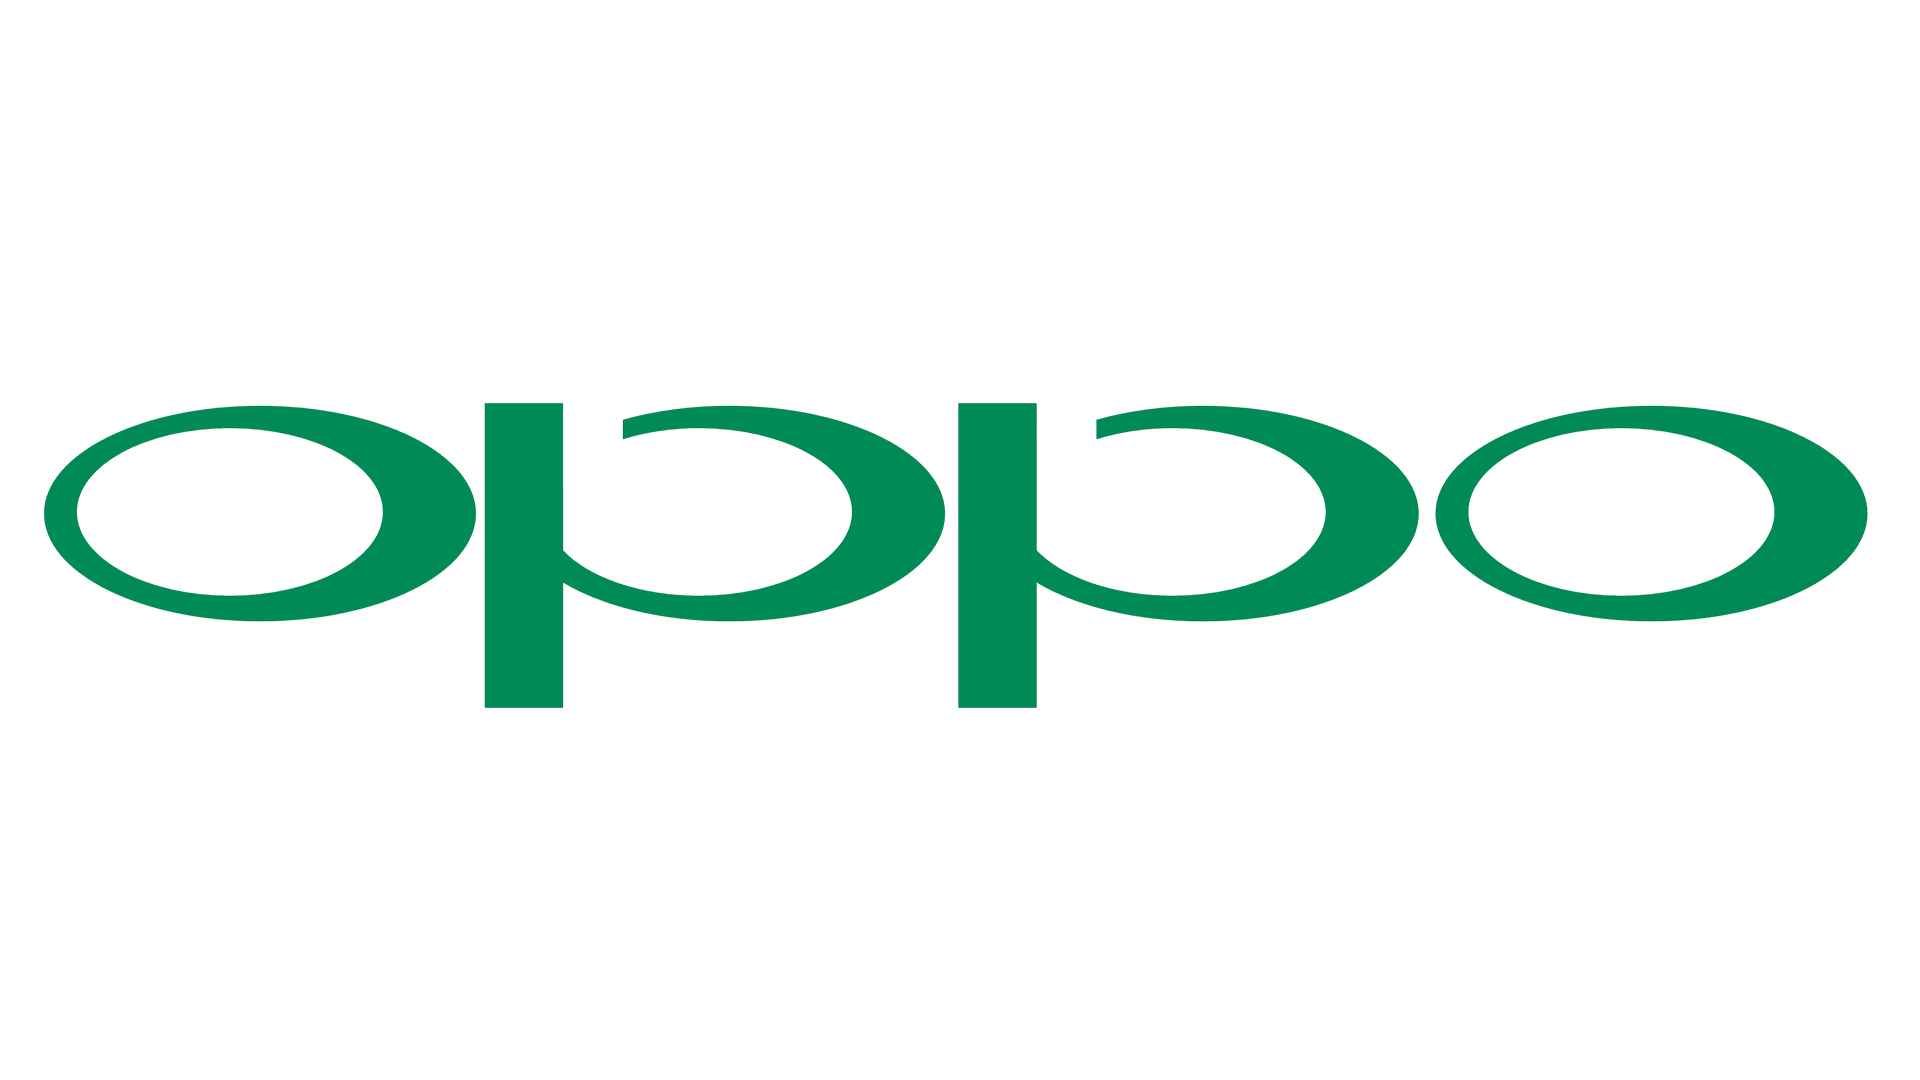 oppo logo png image download #40752